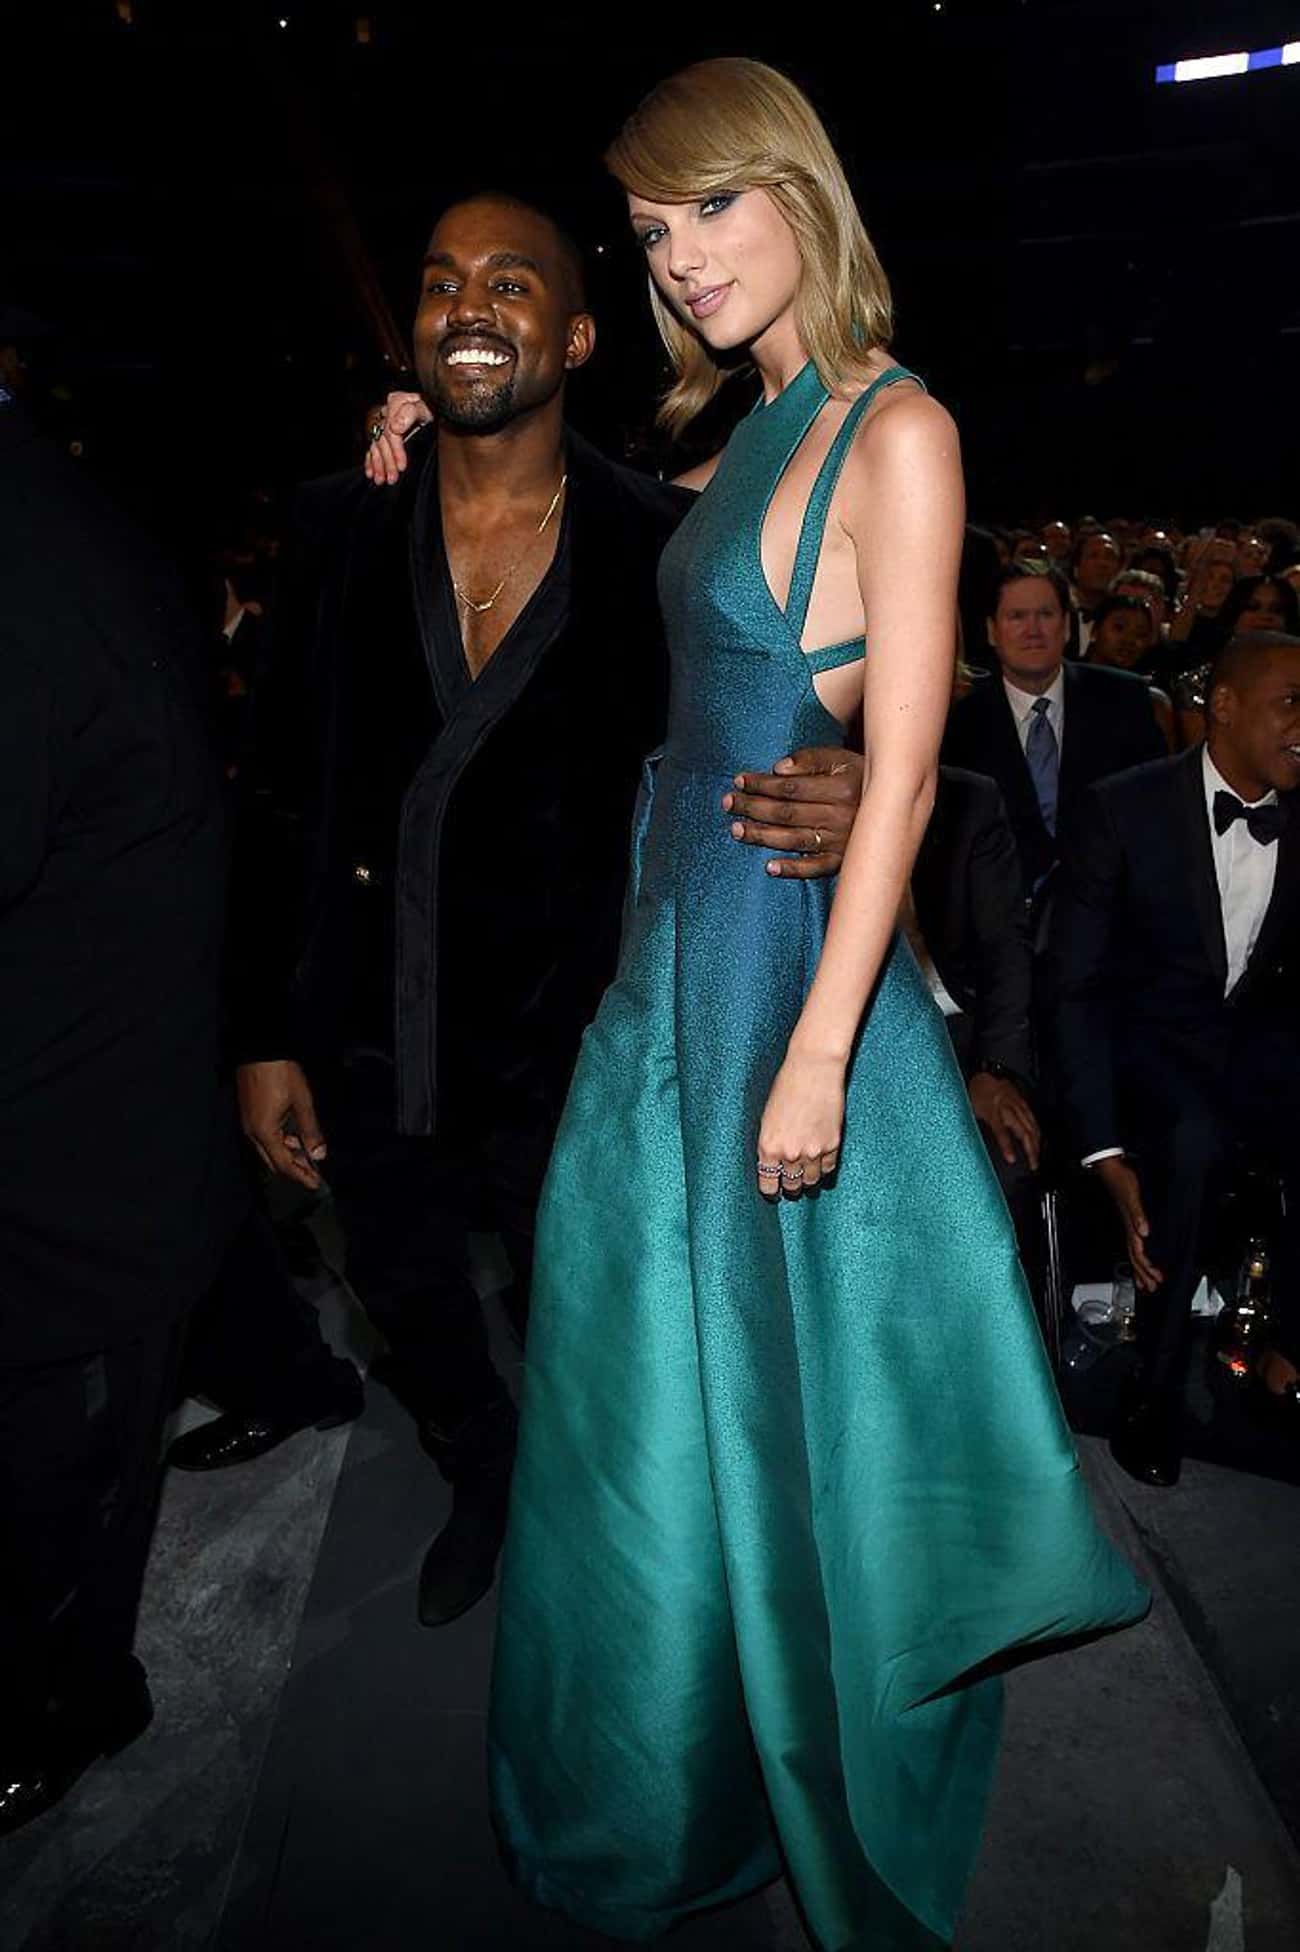 Photos of Taylor Swift height compared to other singers | Kanye West